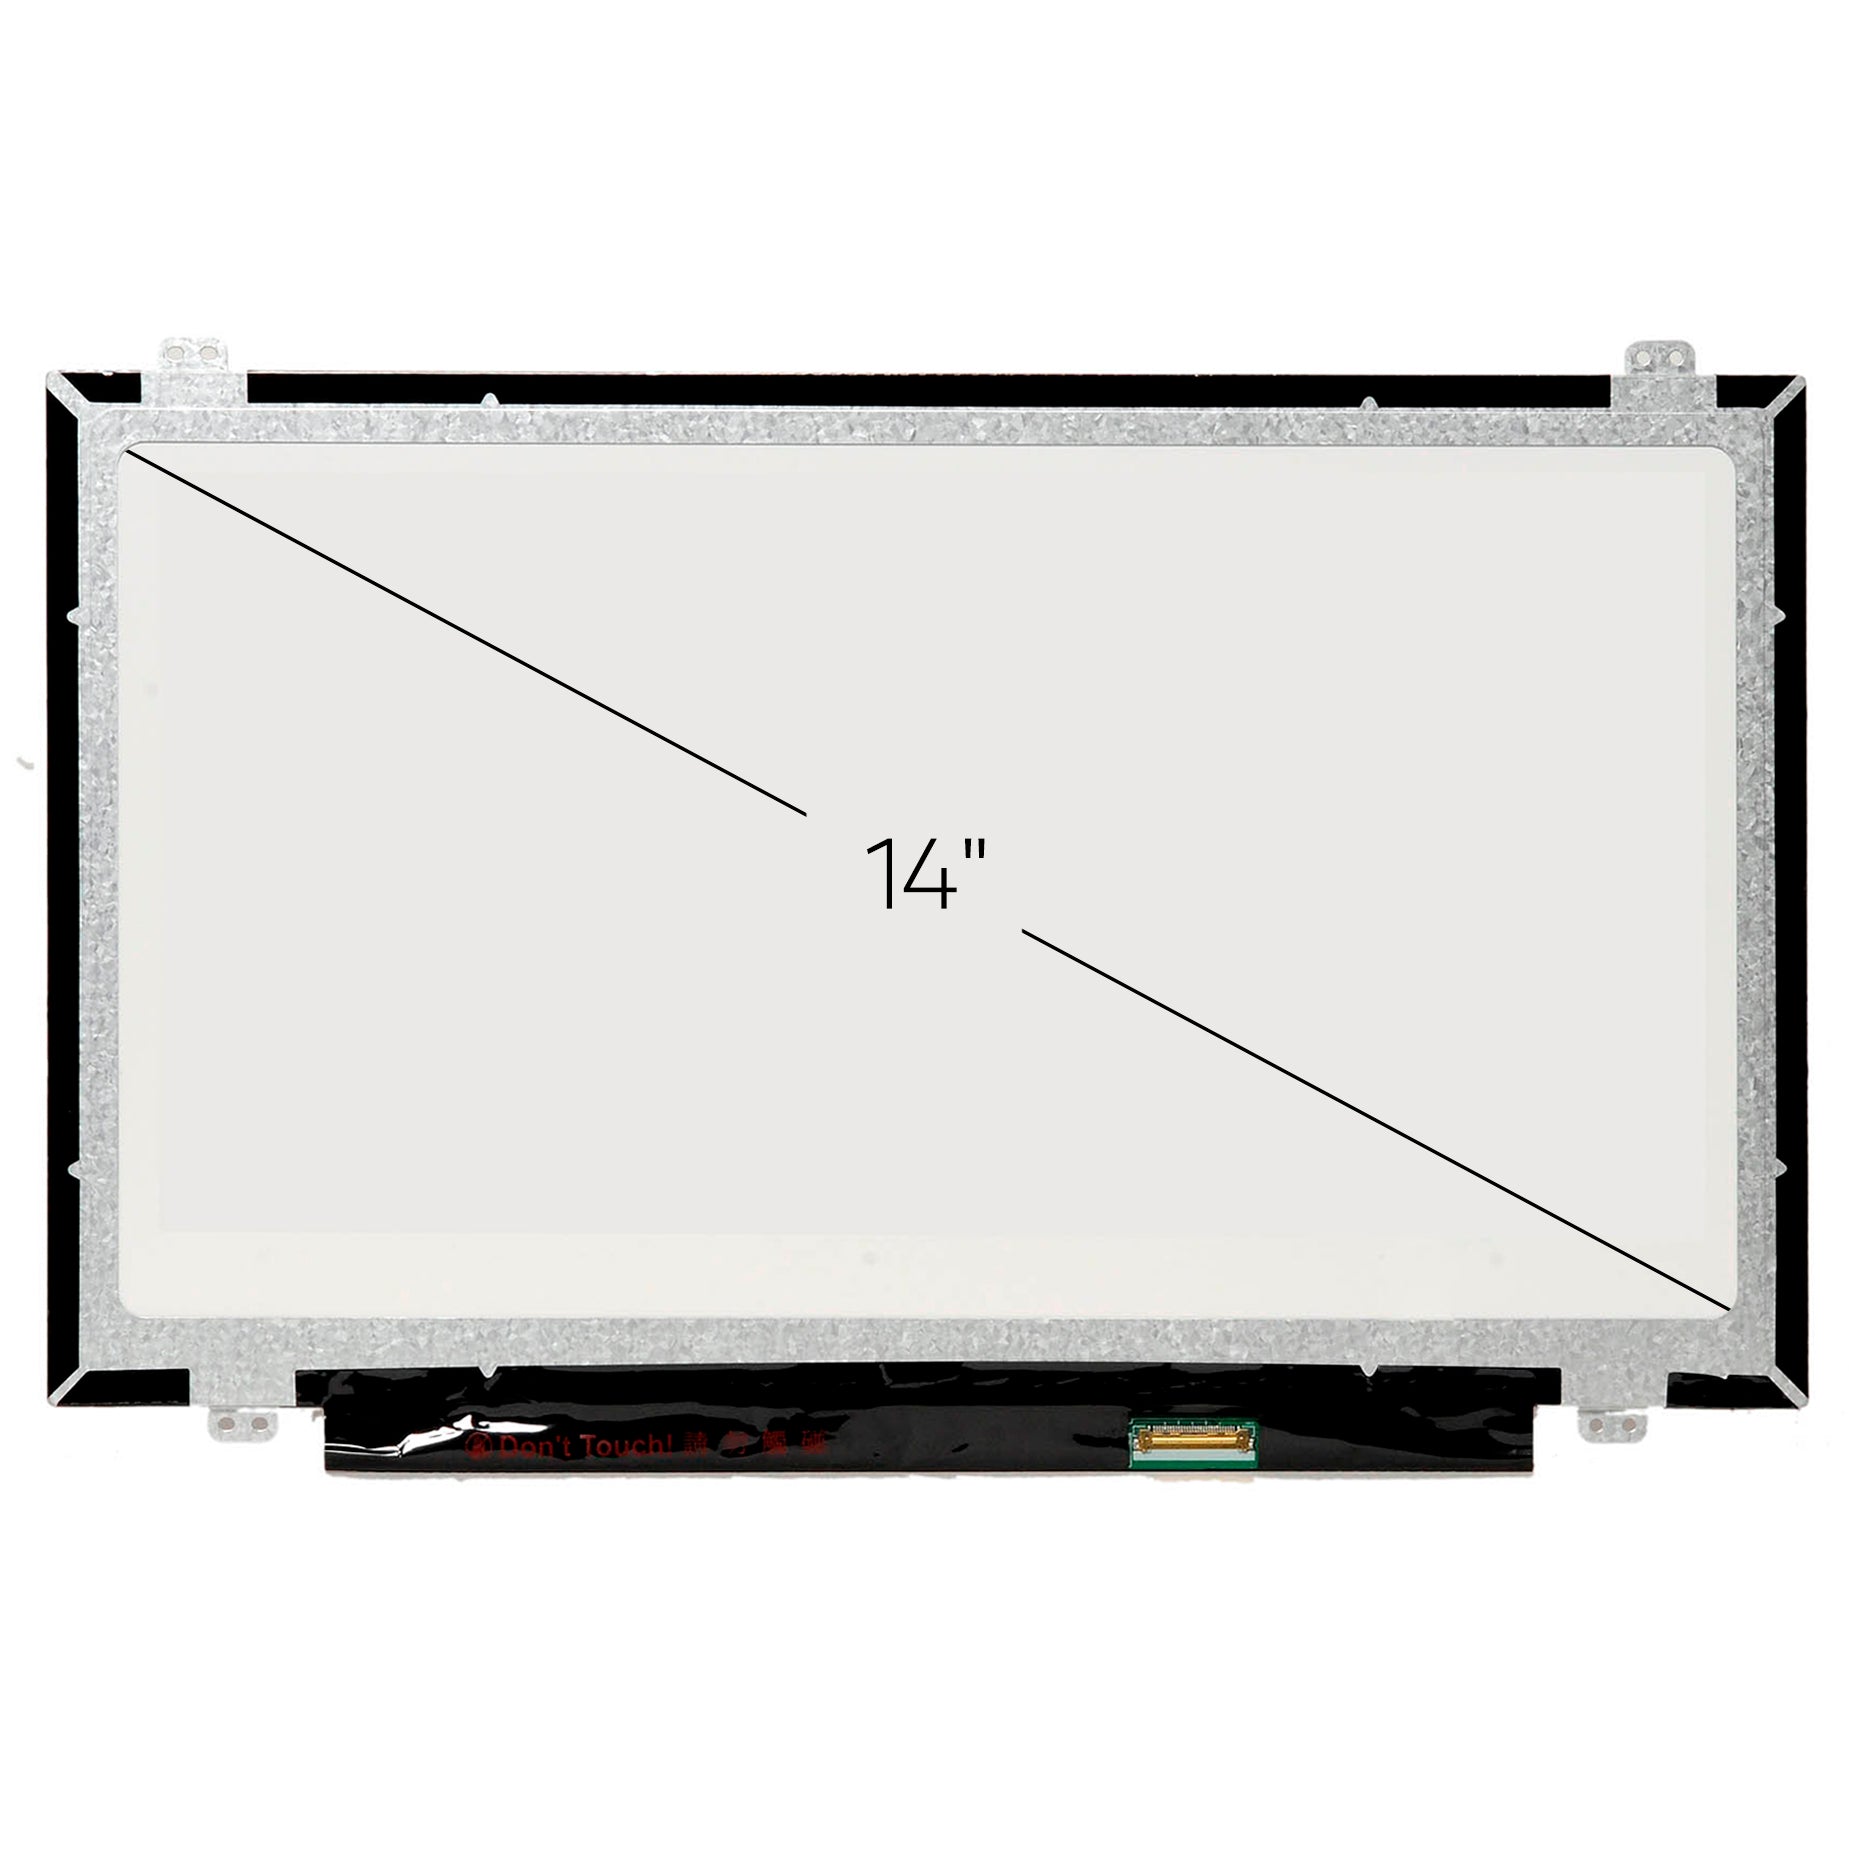 Screen Replacement for N140BGE-EB3 REV.C3 HD 1366x768 Glossy LCD LED Display